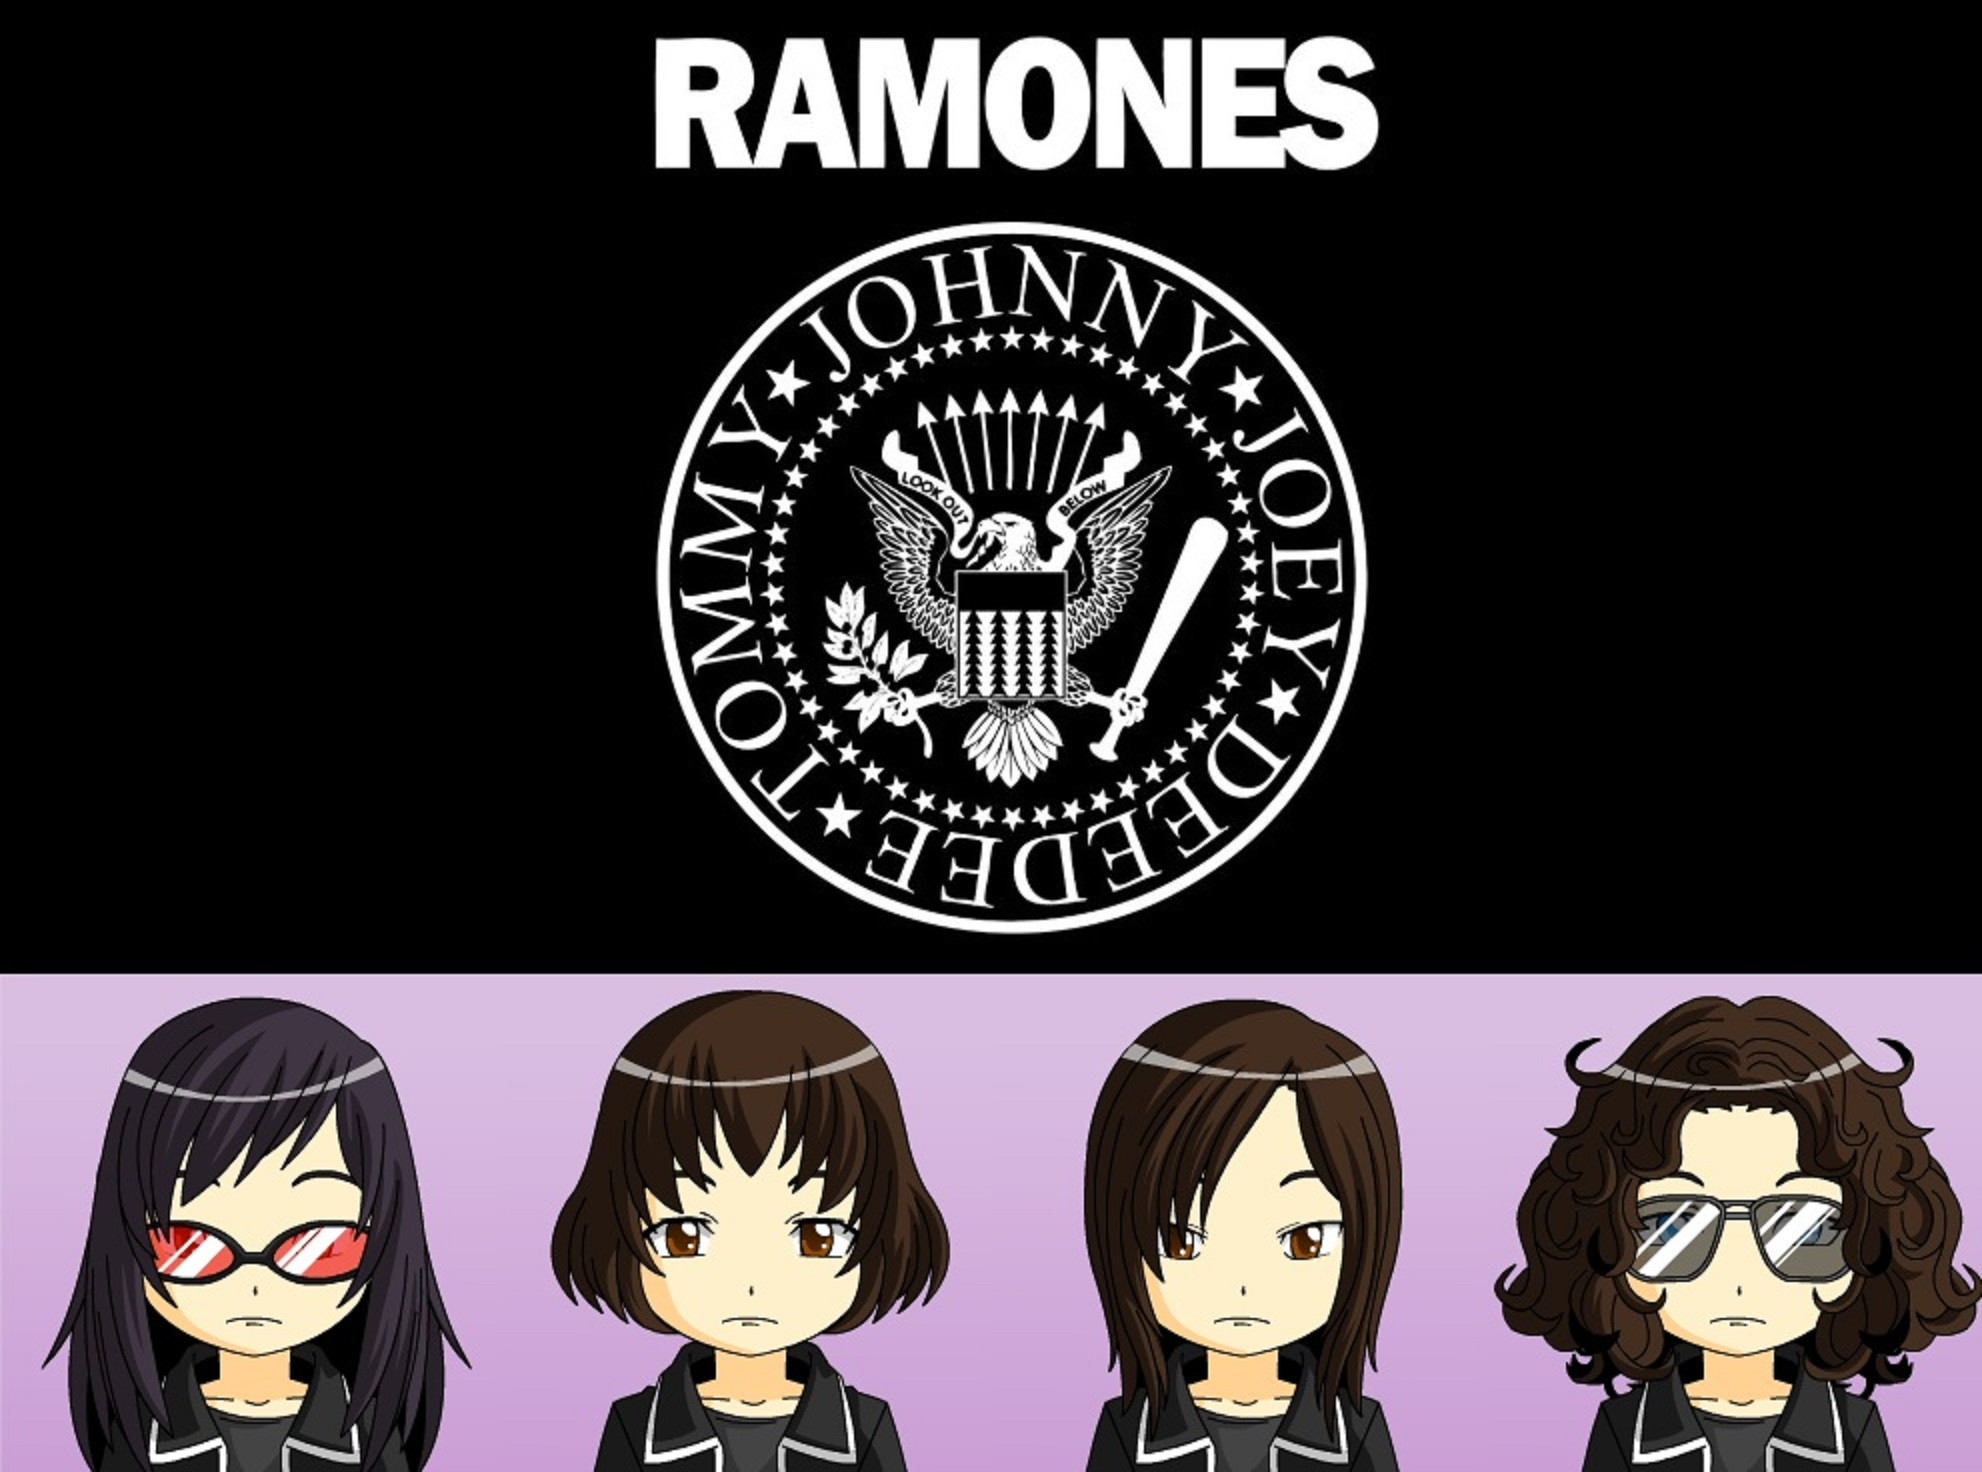 1982x1472 Alecobain26 8 6 The Ramones by JackHammer86